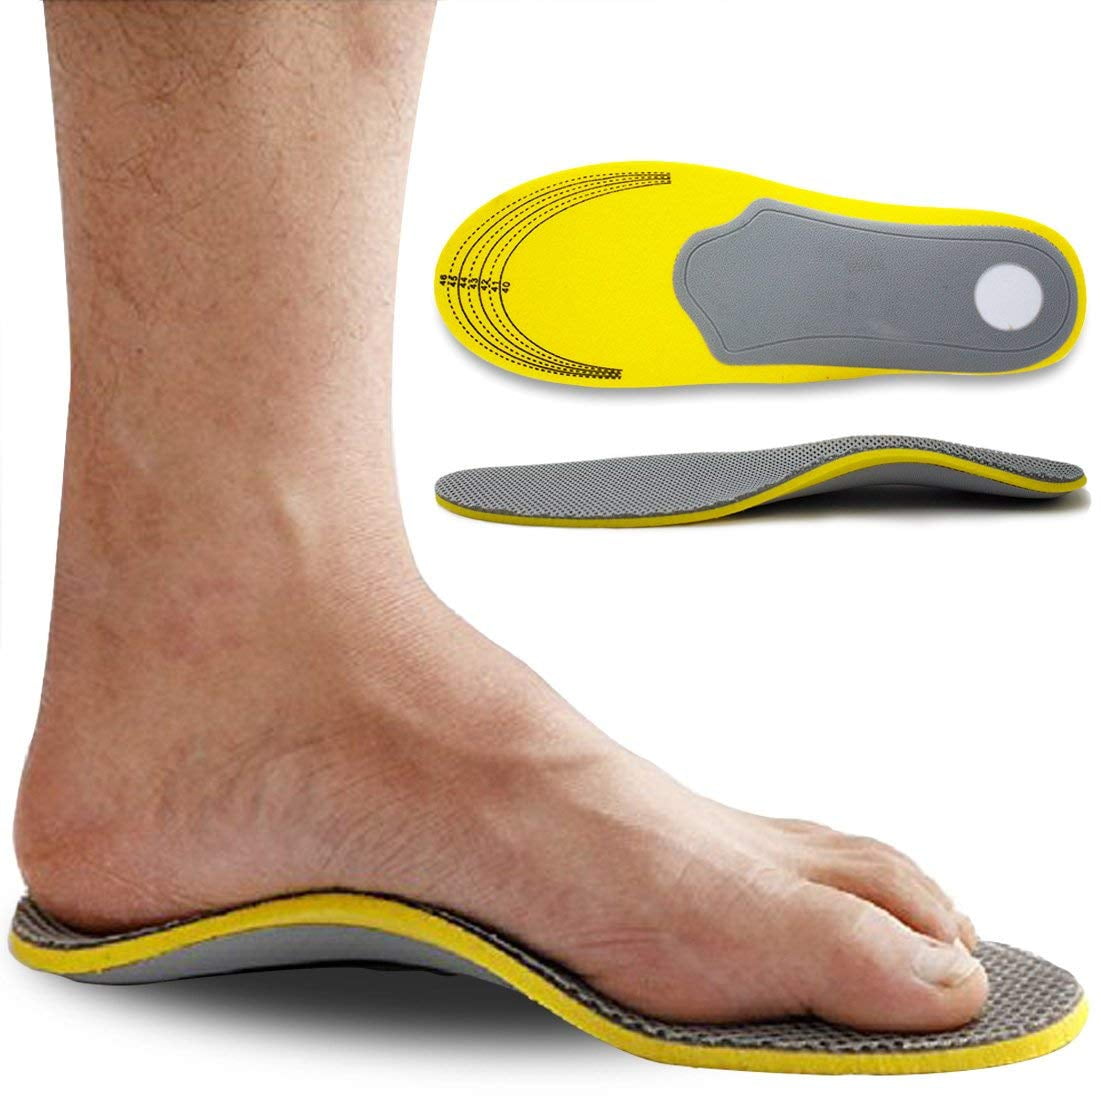 Orthotic Arch Support Shoes Insoles Insert Pad For Kids With Flat Feet BE 